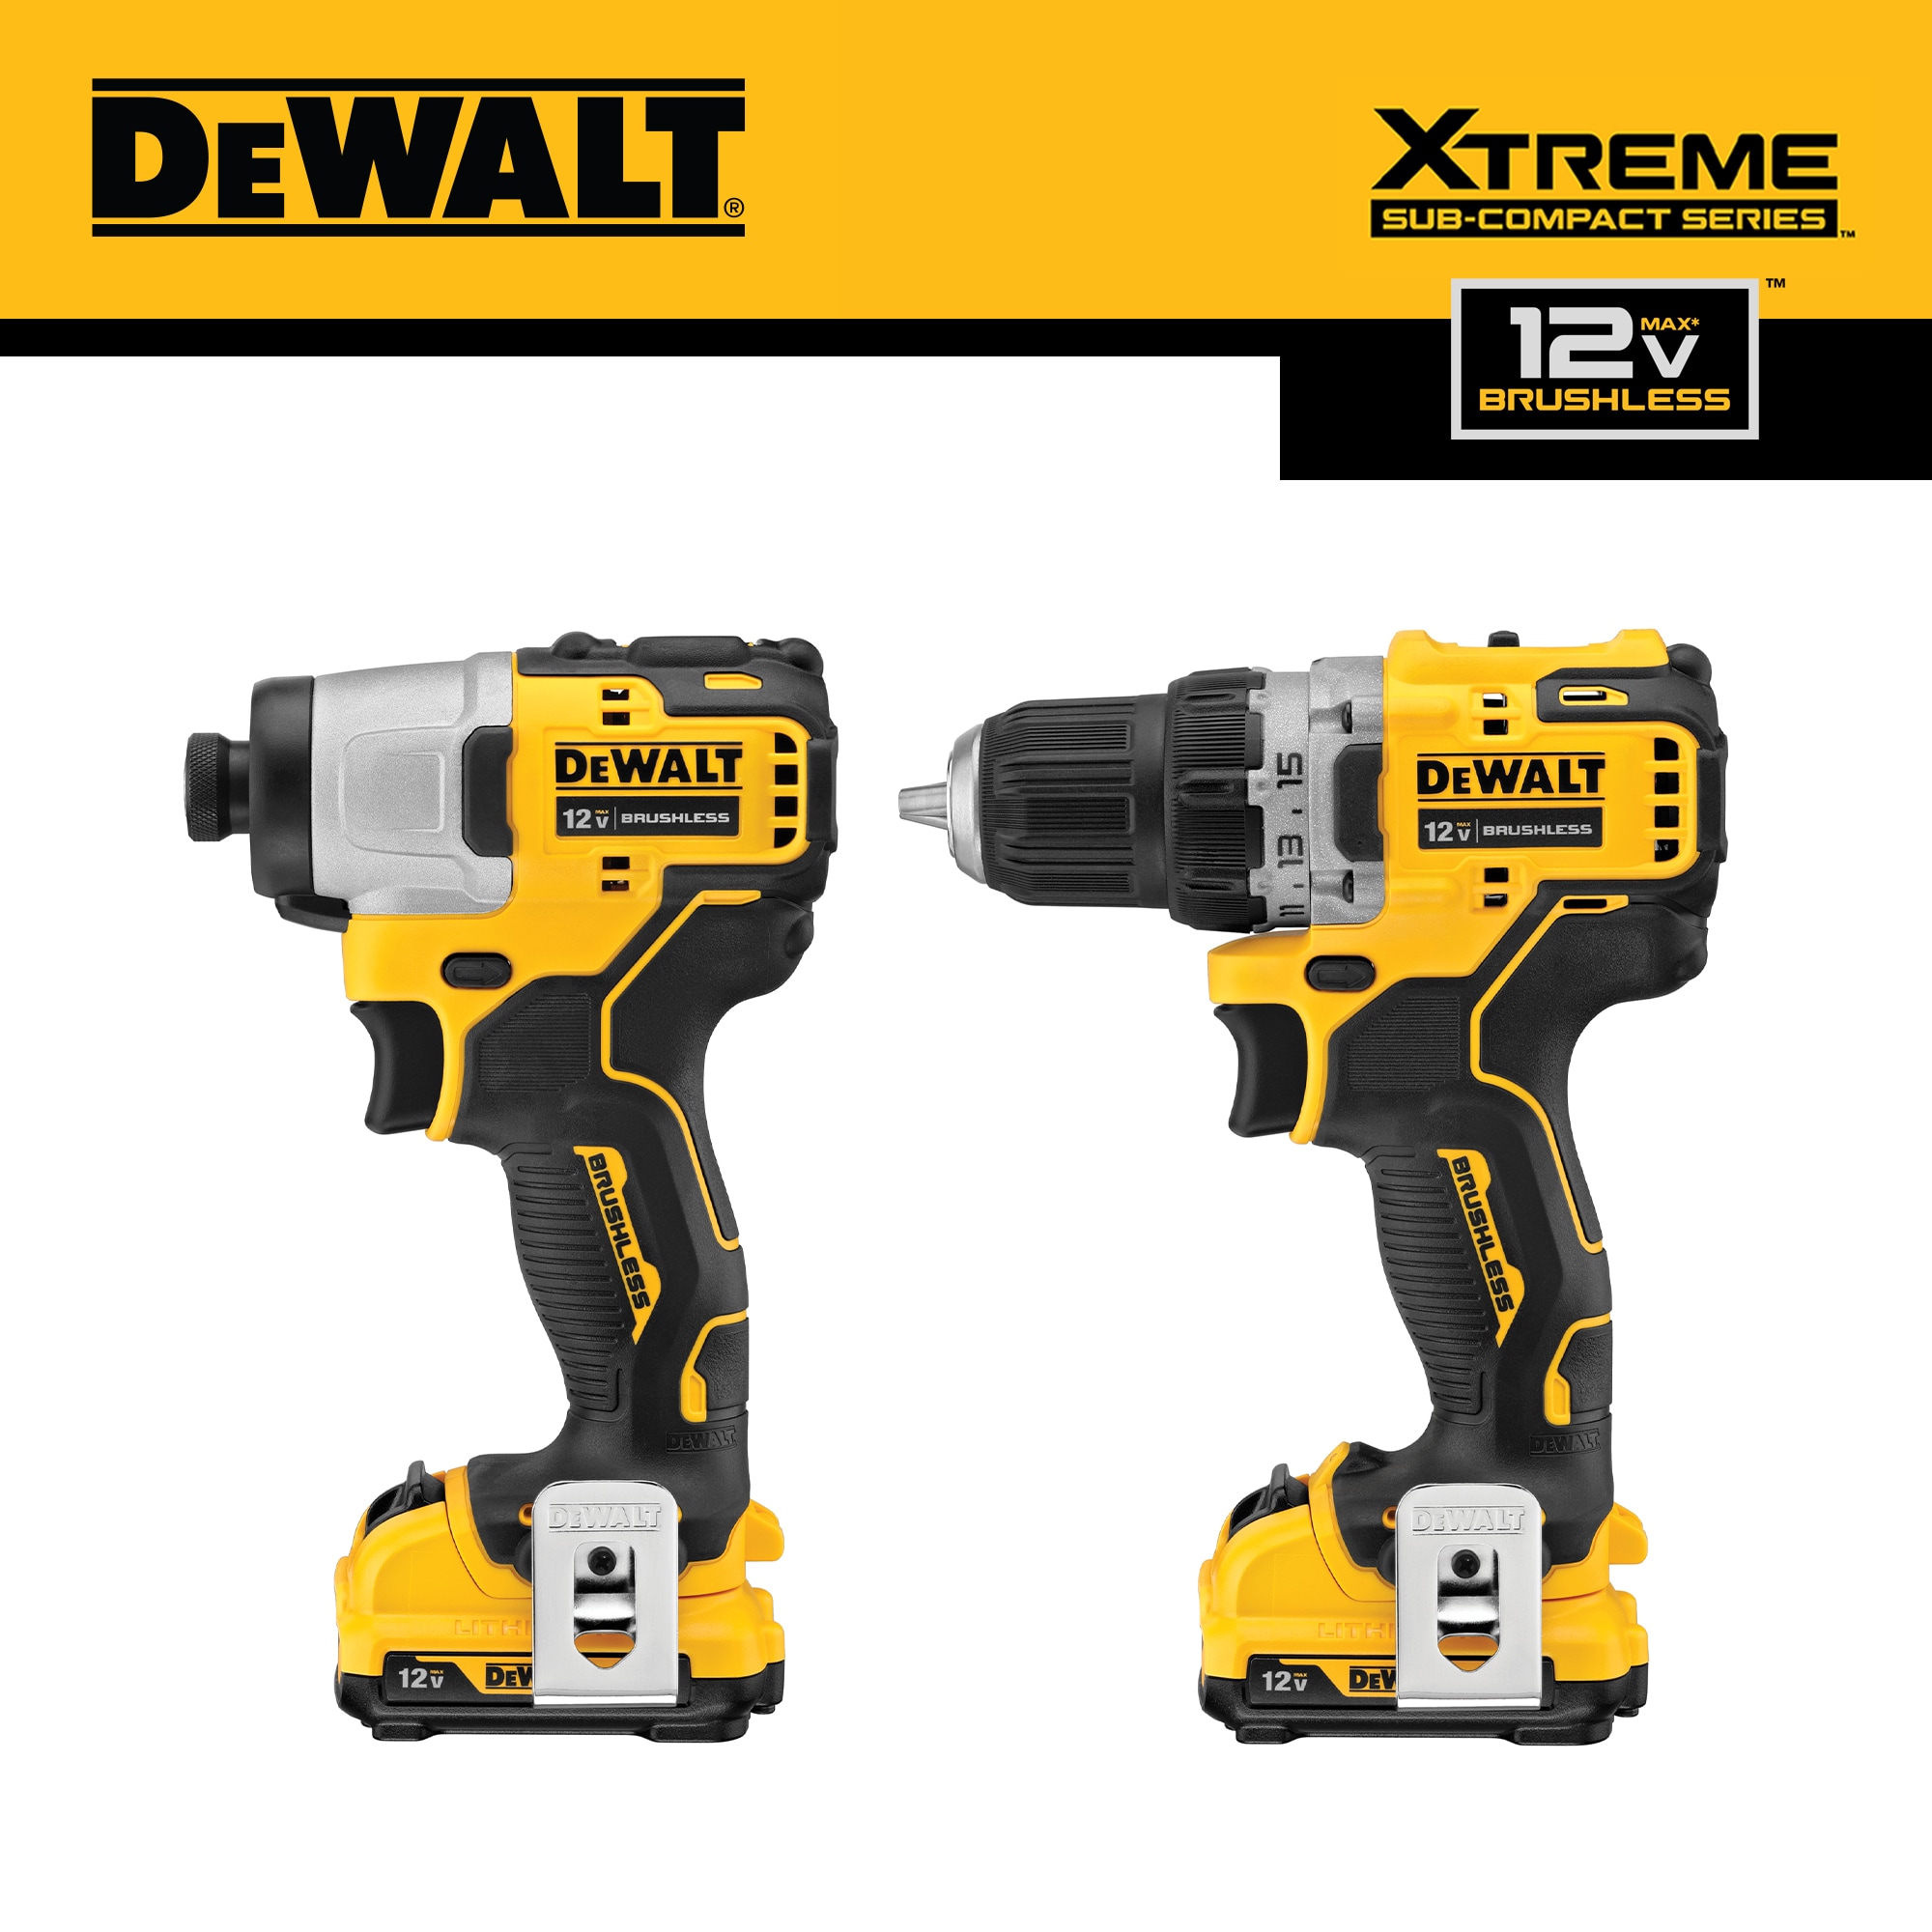 XTREME 2-Tool 12V XR Brushless DrilI/Impact Driver with Bag (2-Batteries and Charger Included) at Lowes.com